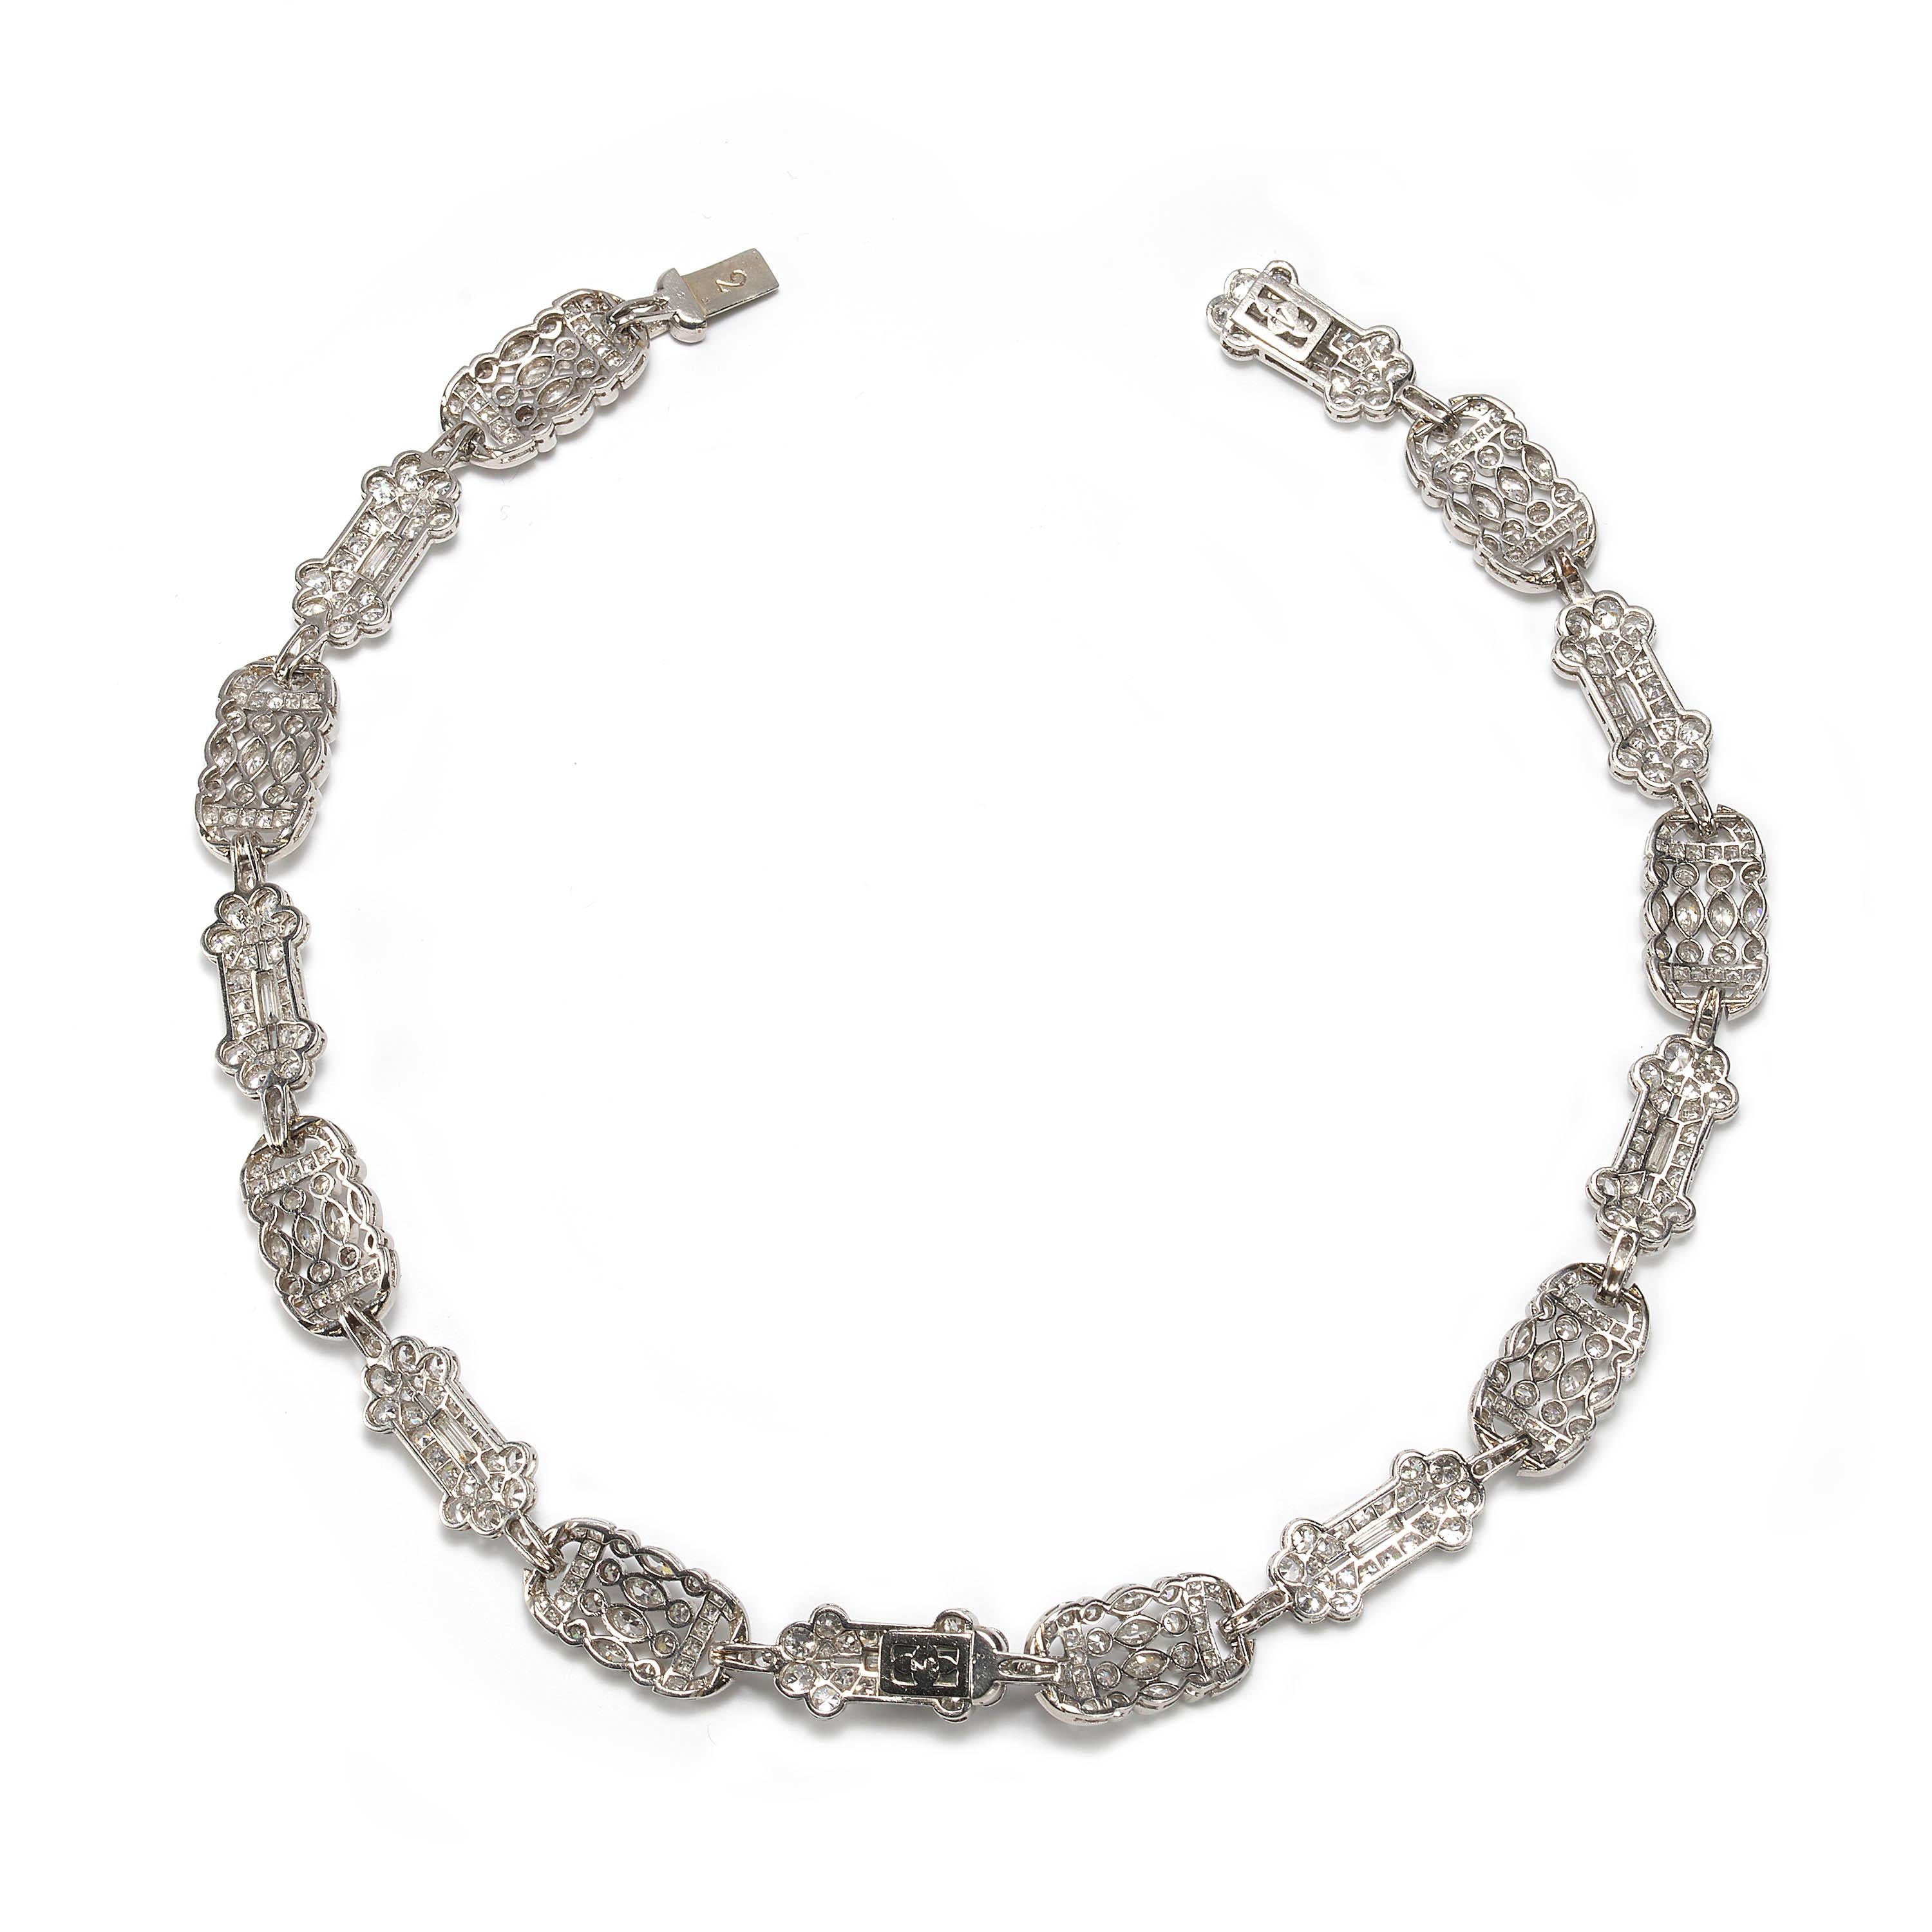 A French Belle Époque diamond necklace bracelets, each bracelet is designed as eight decorative panel sections with alternating designs, set with round, single, baguette and marquise-cut diamonds, weighing an estimated total of 20.00ct, mounted in